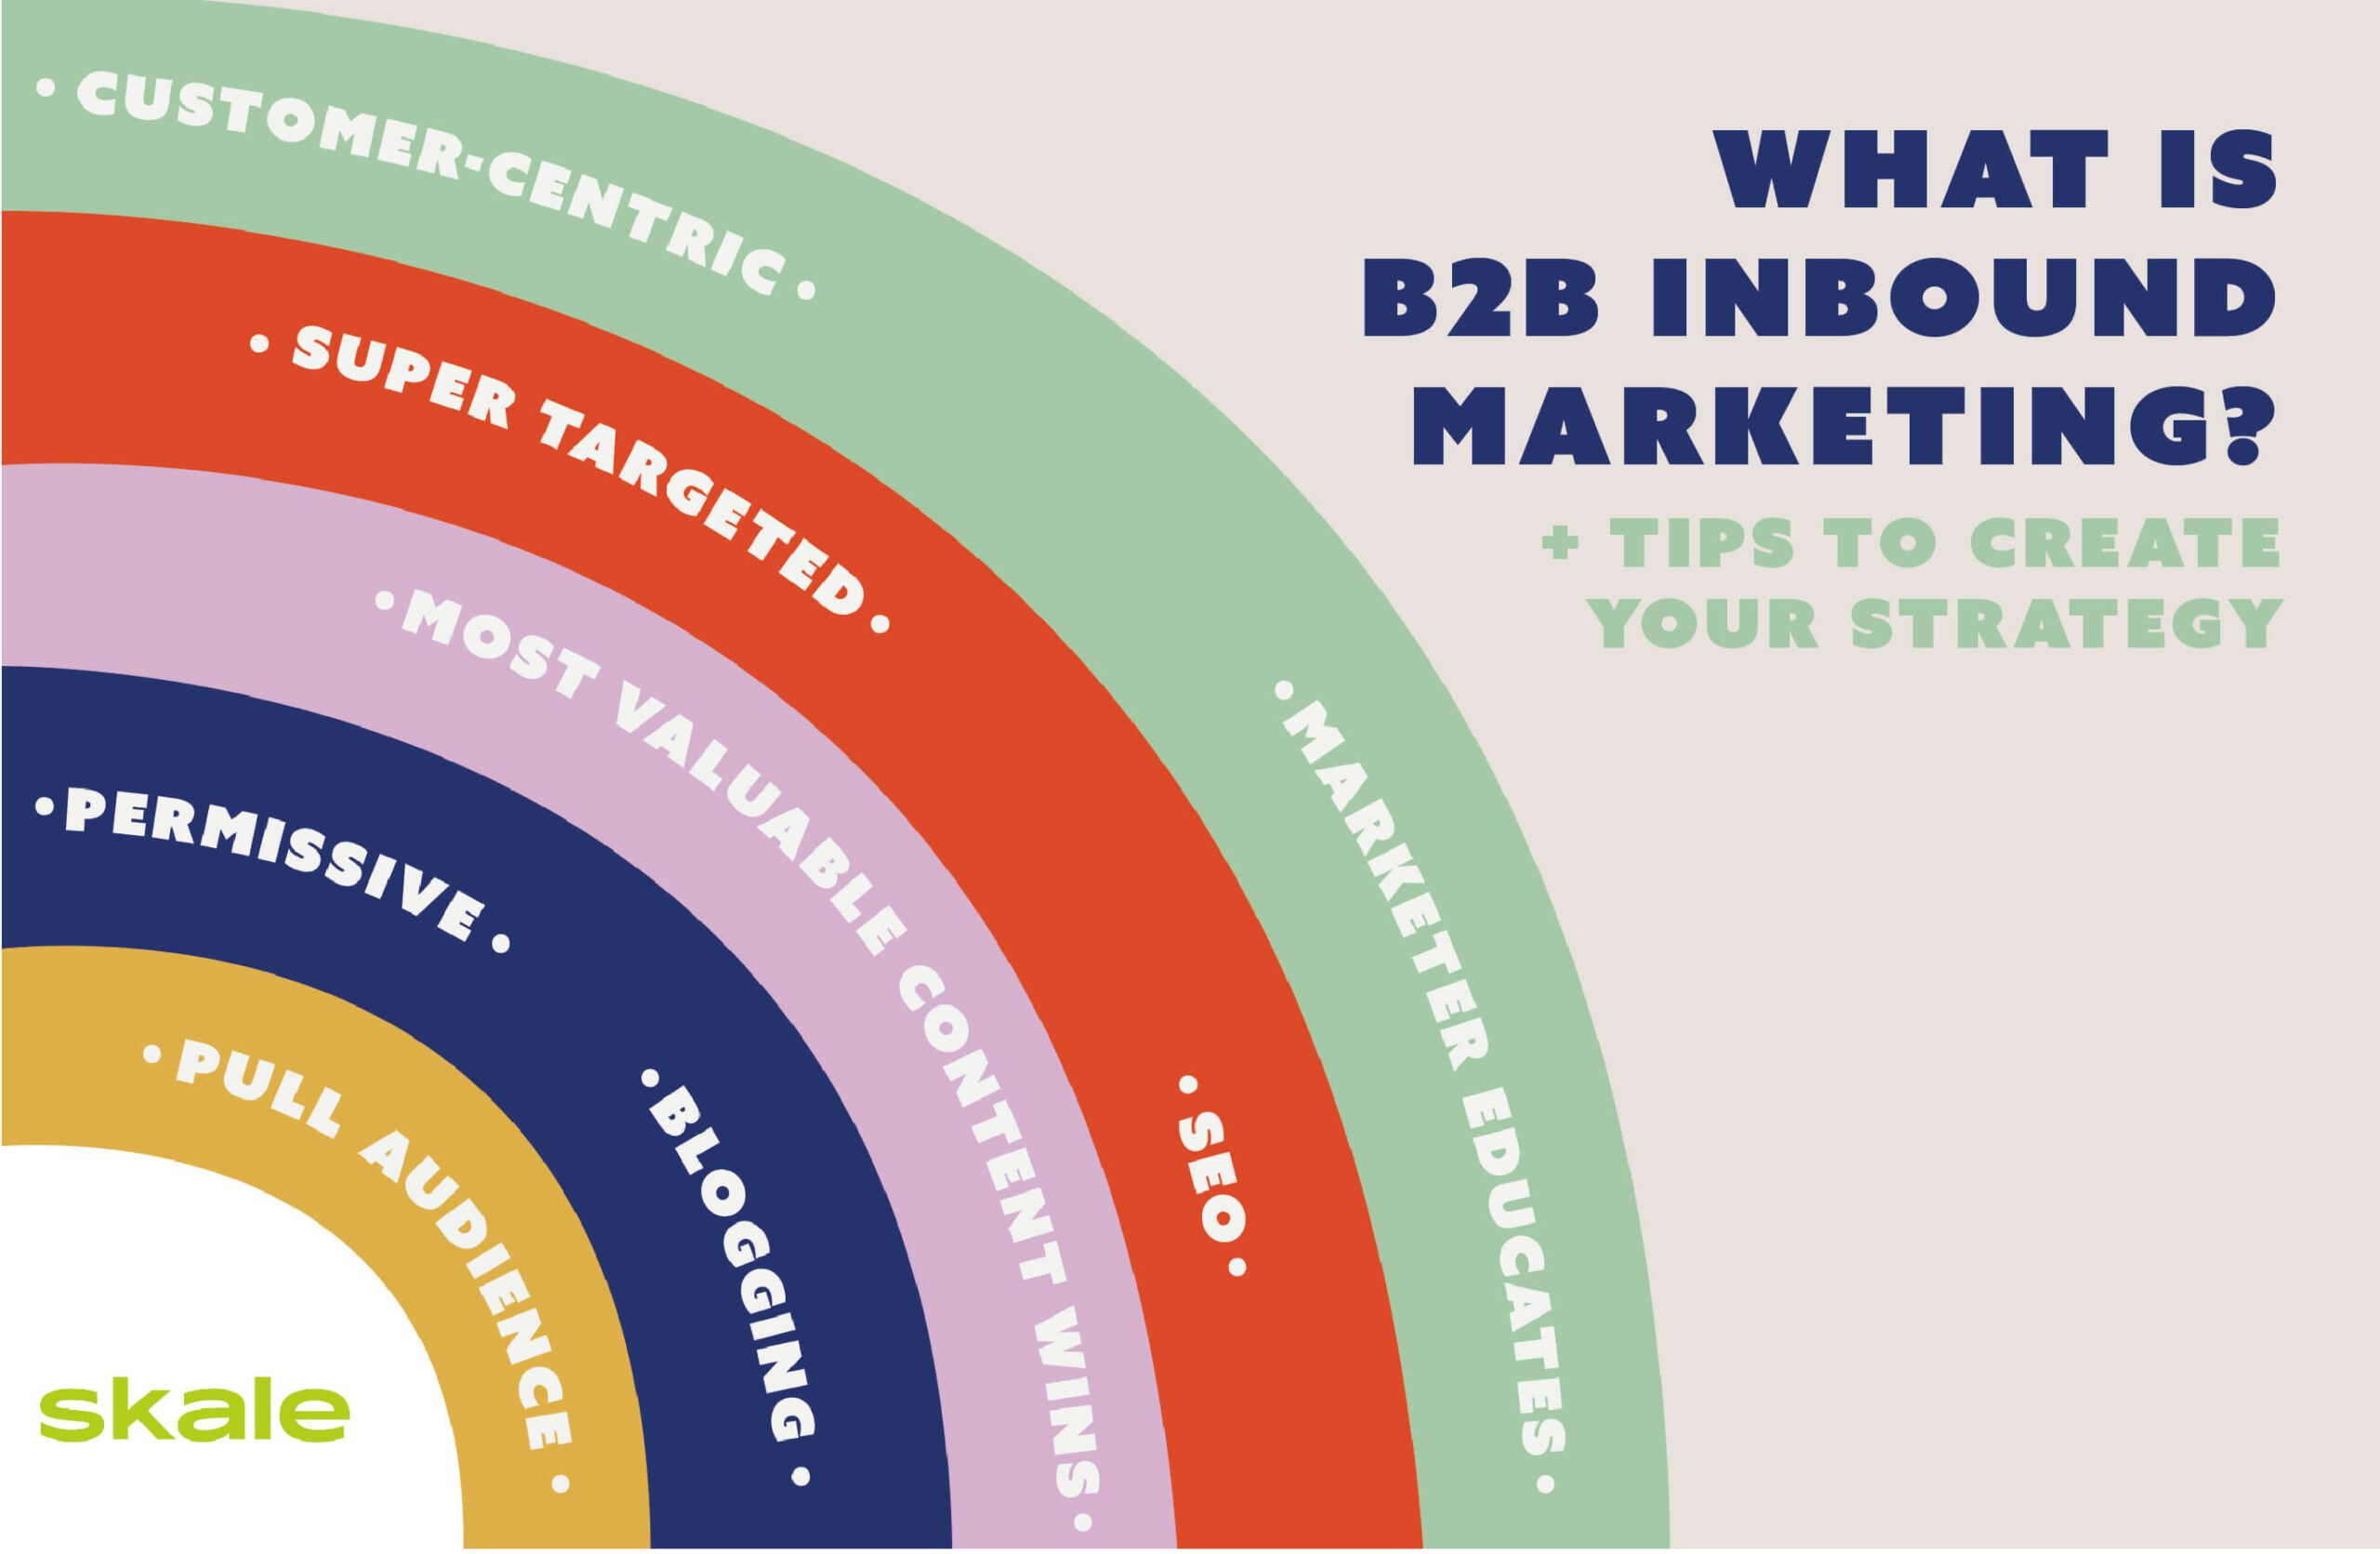 What is B2B Inbound Marketing? (+ Tips to Create Your Strategy)